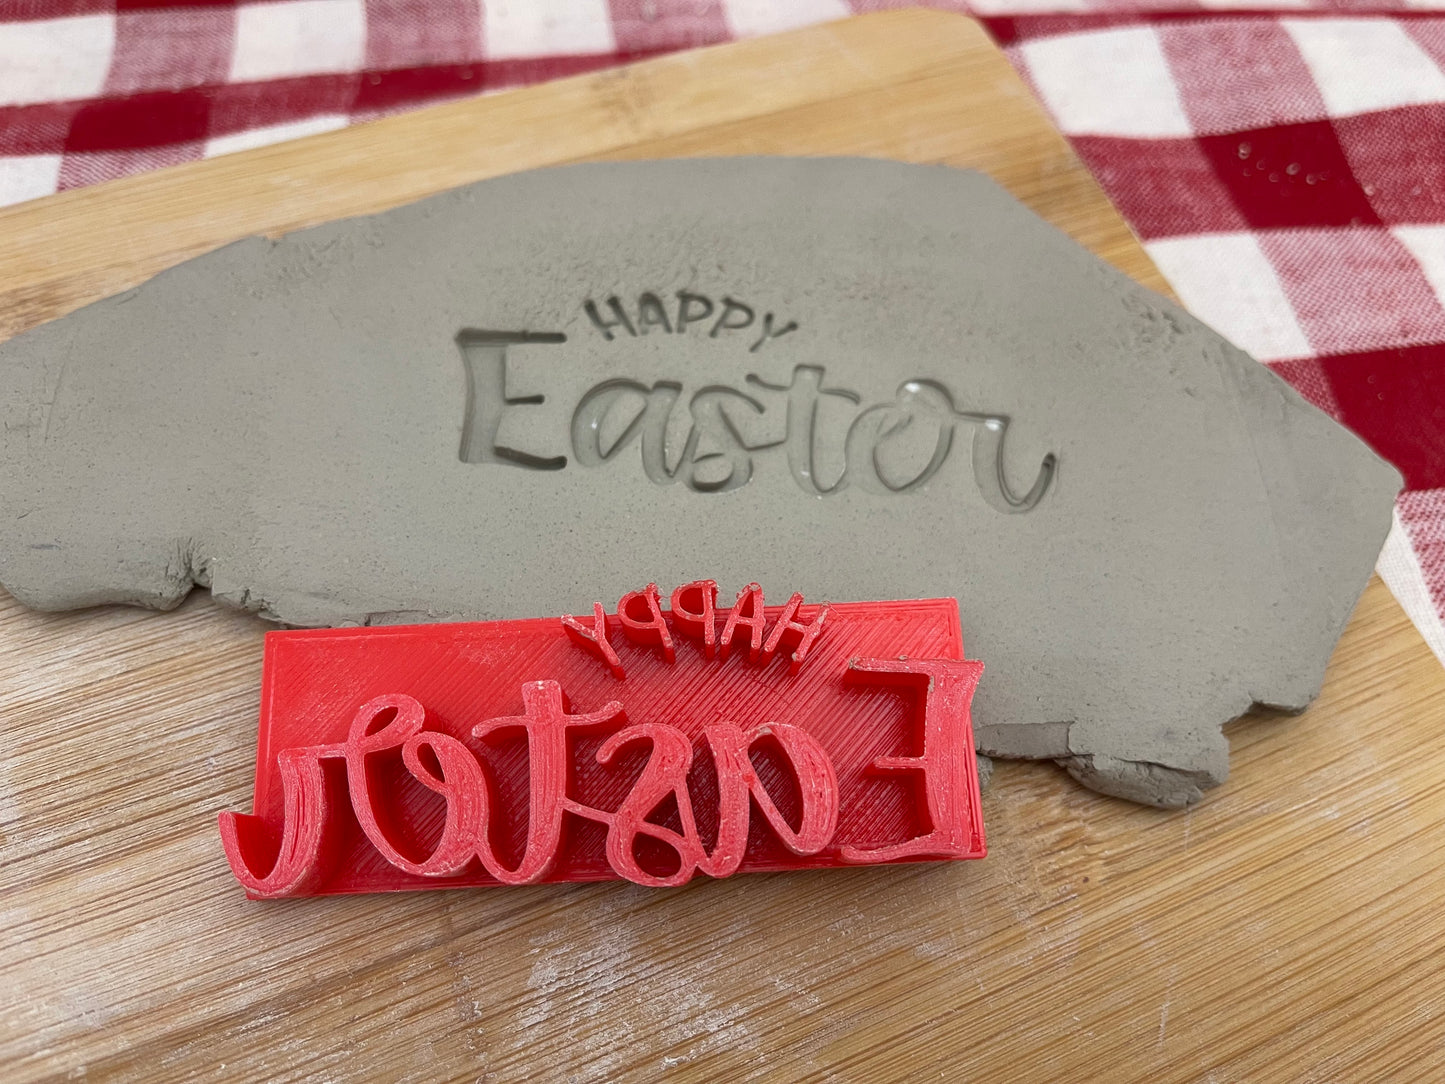 "Happy Easter" word stamp - plastic 3D Printed, Multiple Sizes Available.